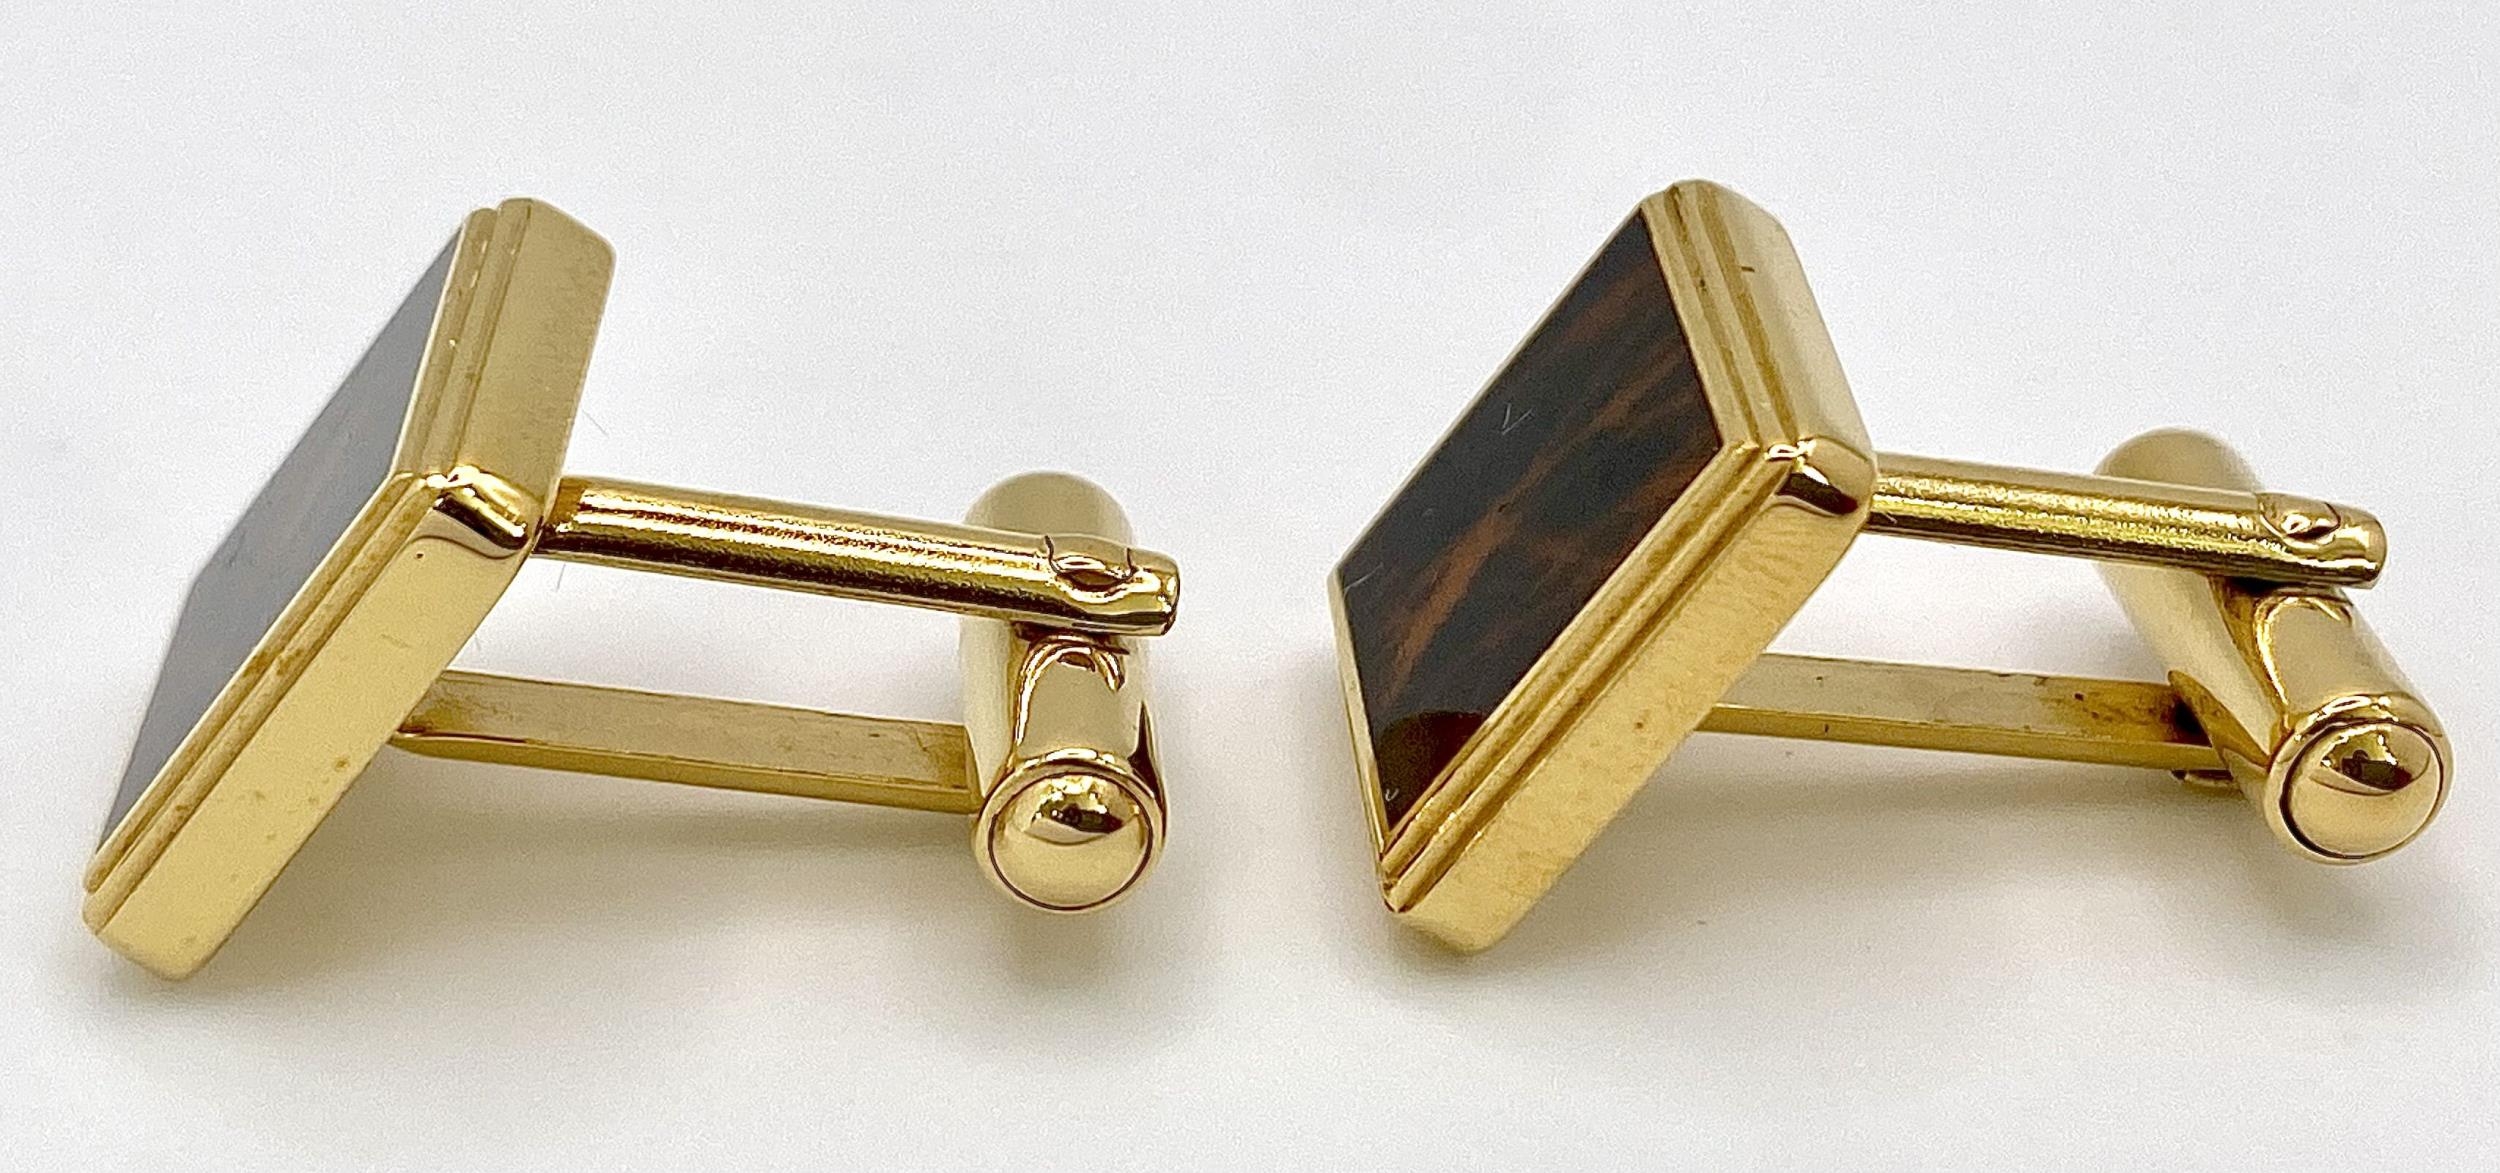 An Excellent Condition Pair of Square Yellow Gold Gilt Tortoiseshell Cufflinks by Dunhill in their - Image 4 of 9